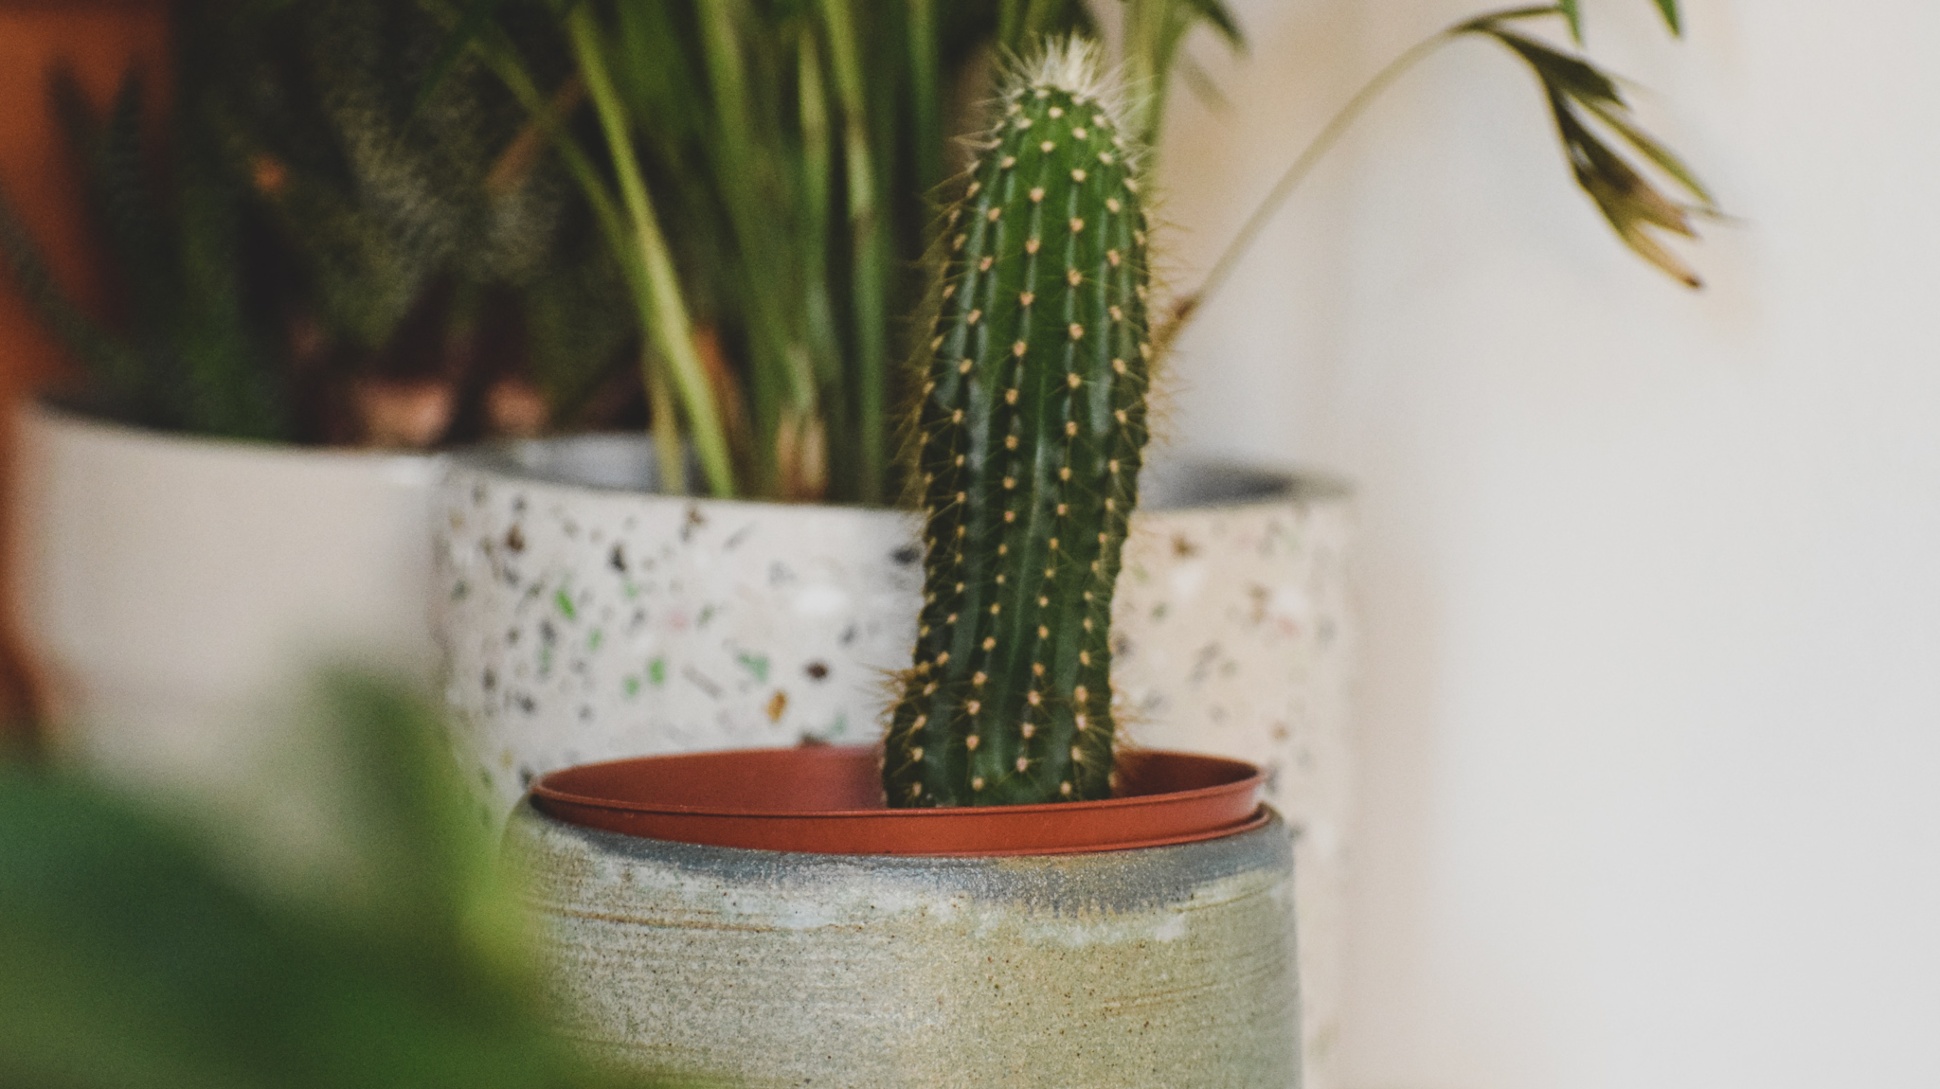 A small cacti growing in a grey pot